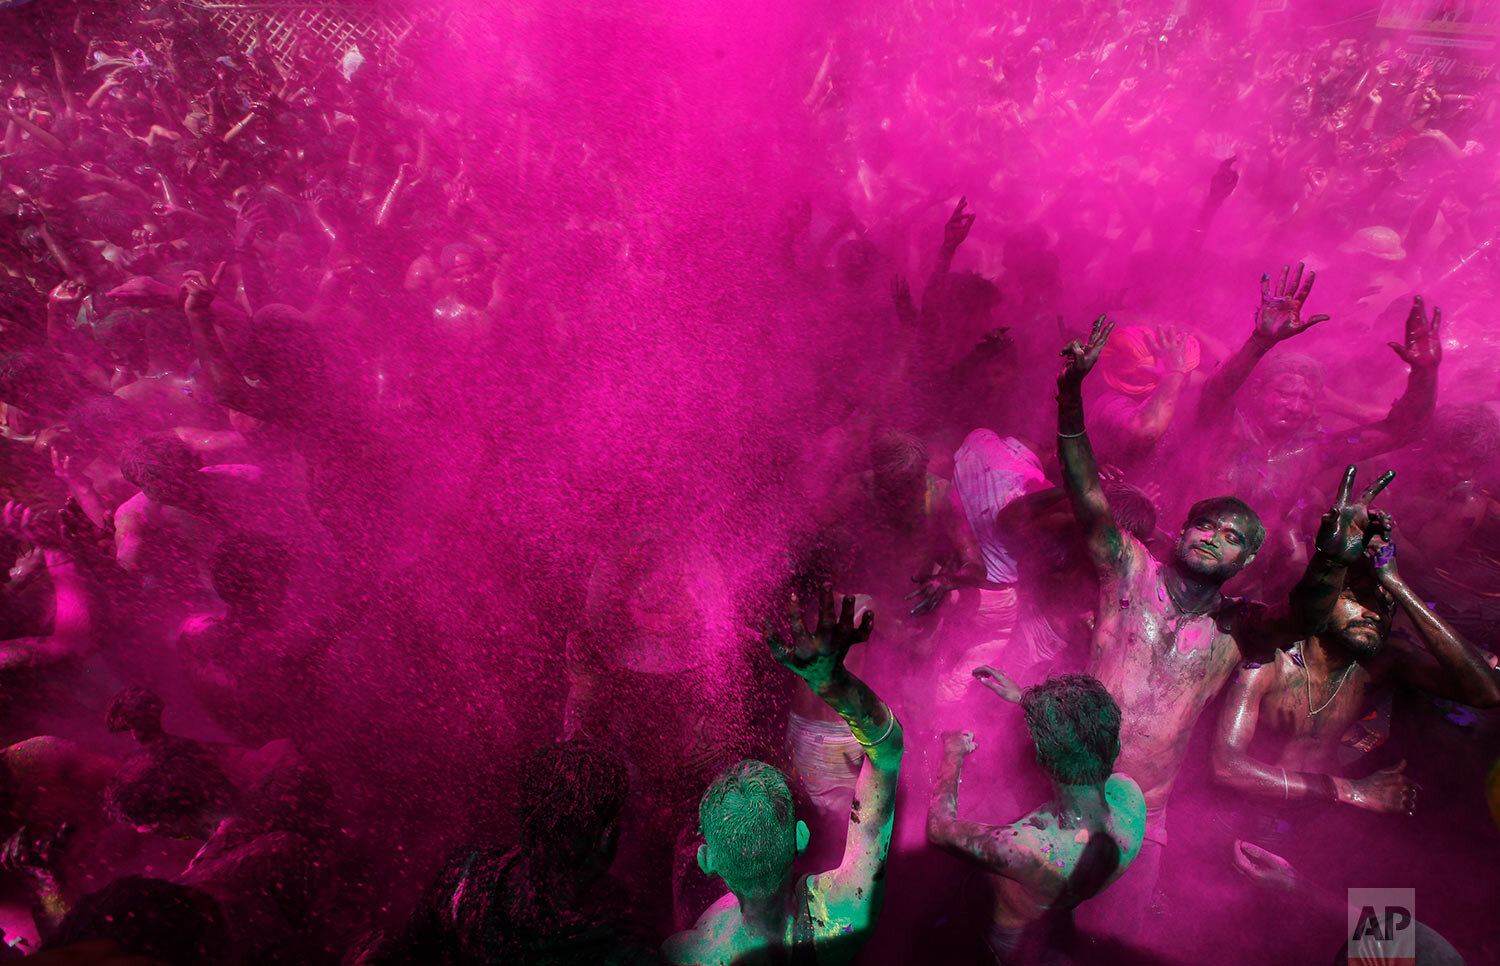  Hindu devotees throw colored powder and dance as they celebrate "Holi," the festival of colors in Prayagraj, India, Tuesday, March 30, 2021. (AP Photo/Rajesh Kumar Singh) 